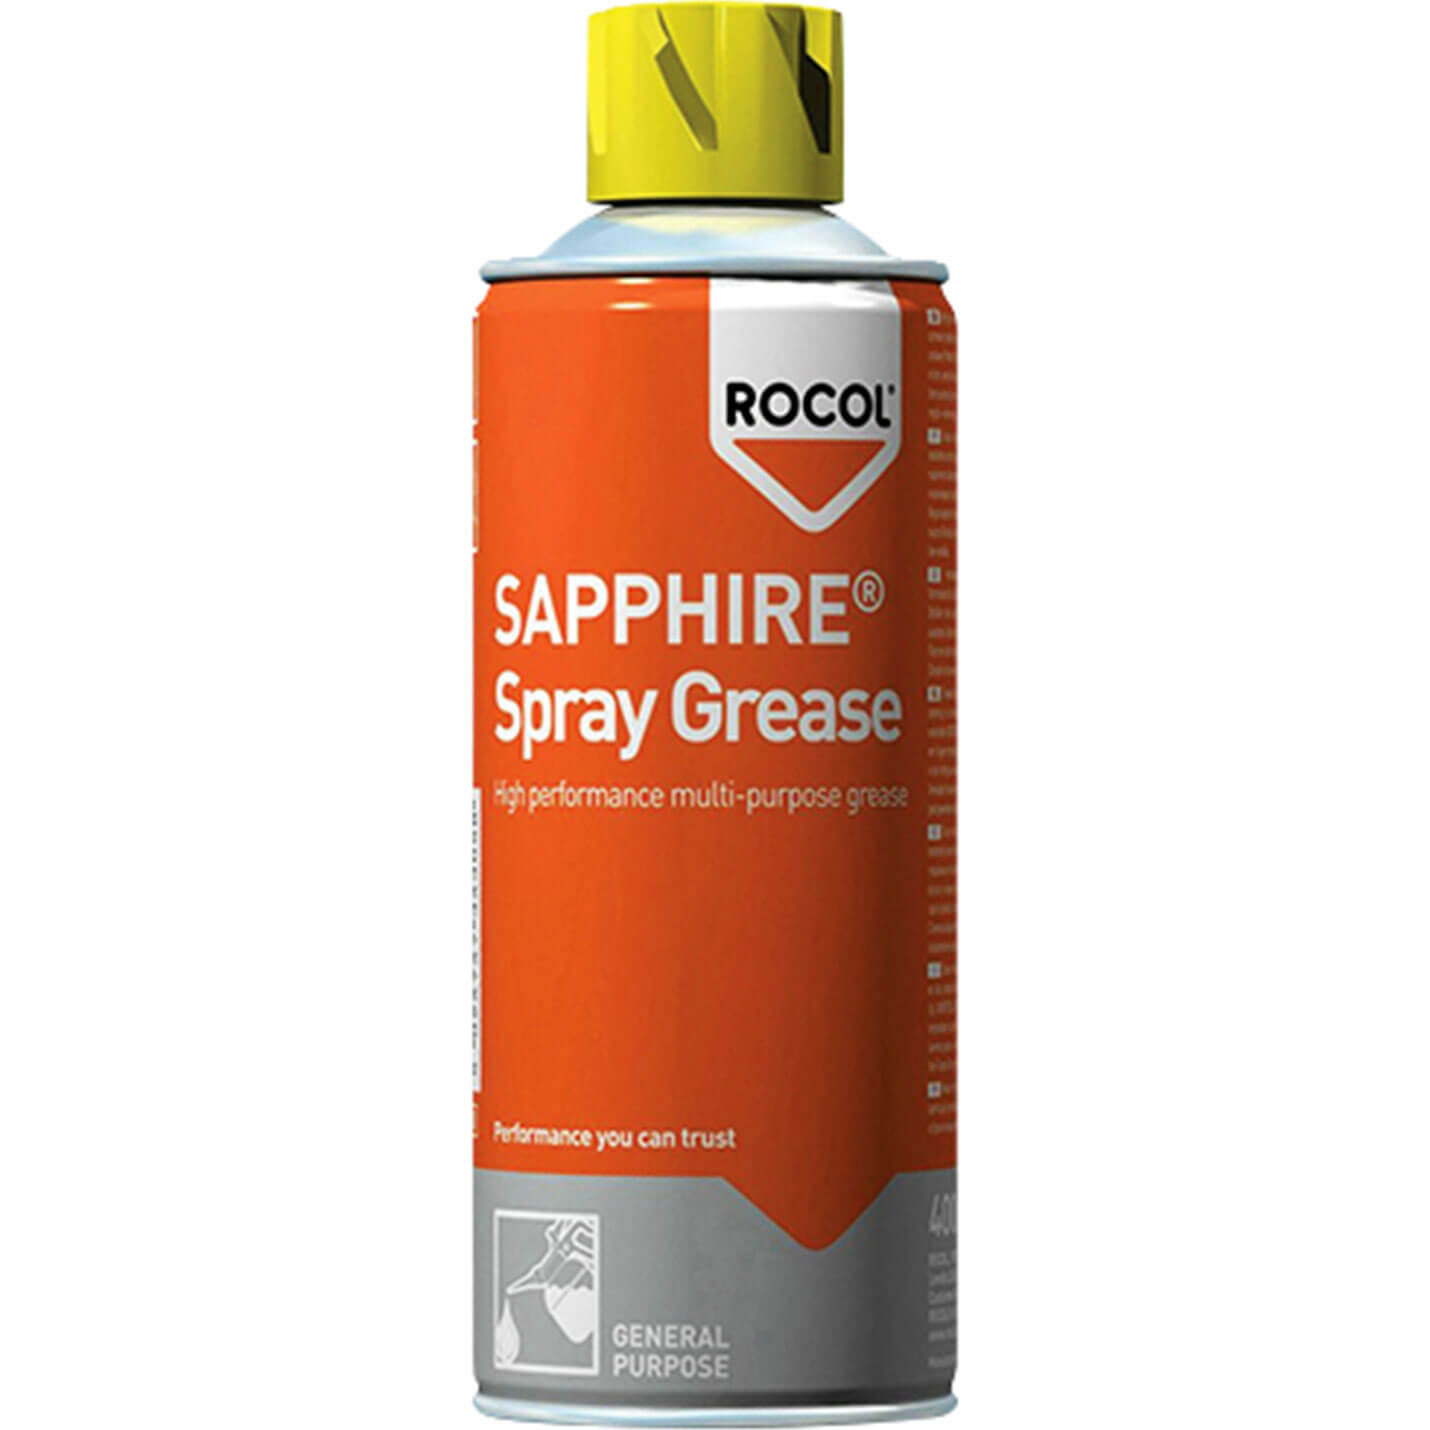 Image of Rocol Sapphire Spray Grease 400ml